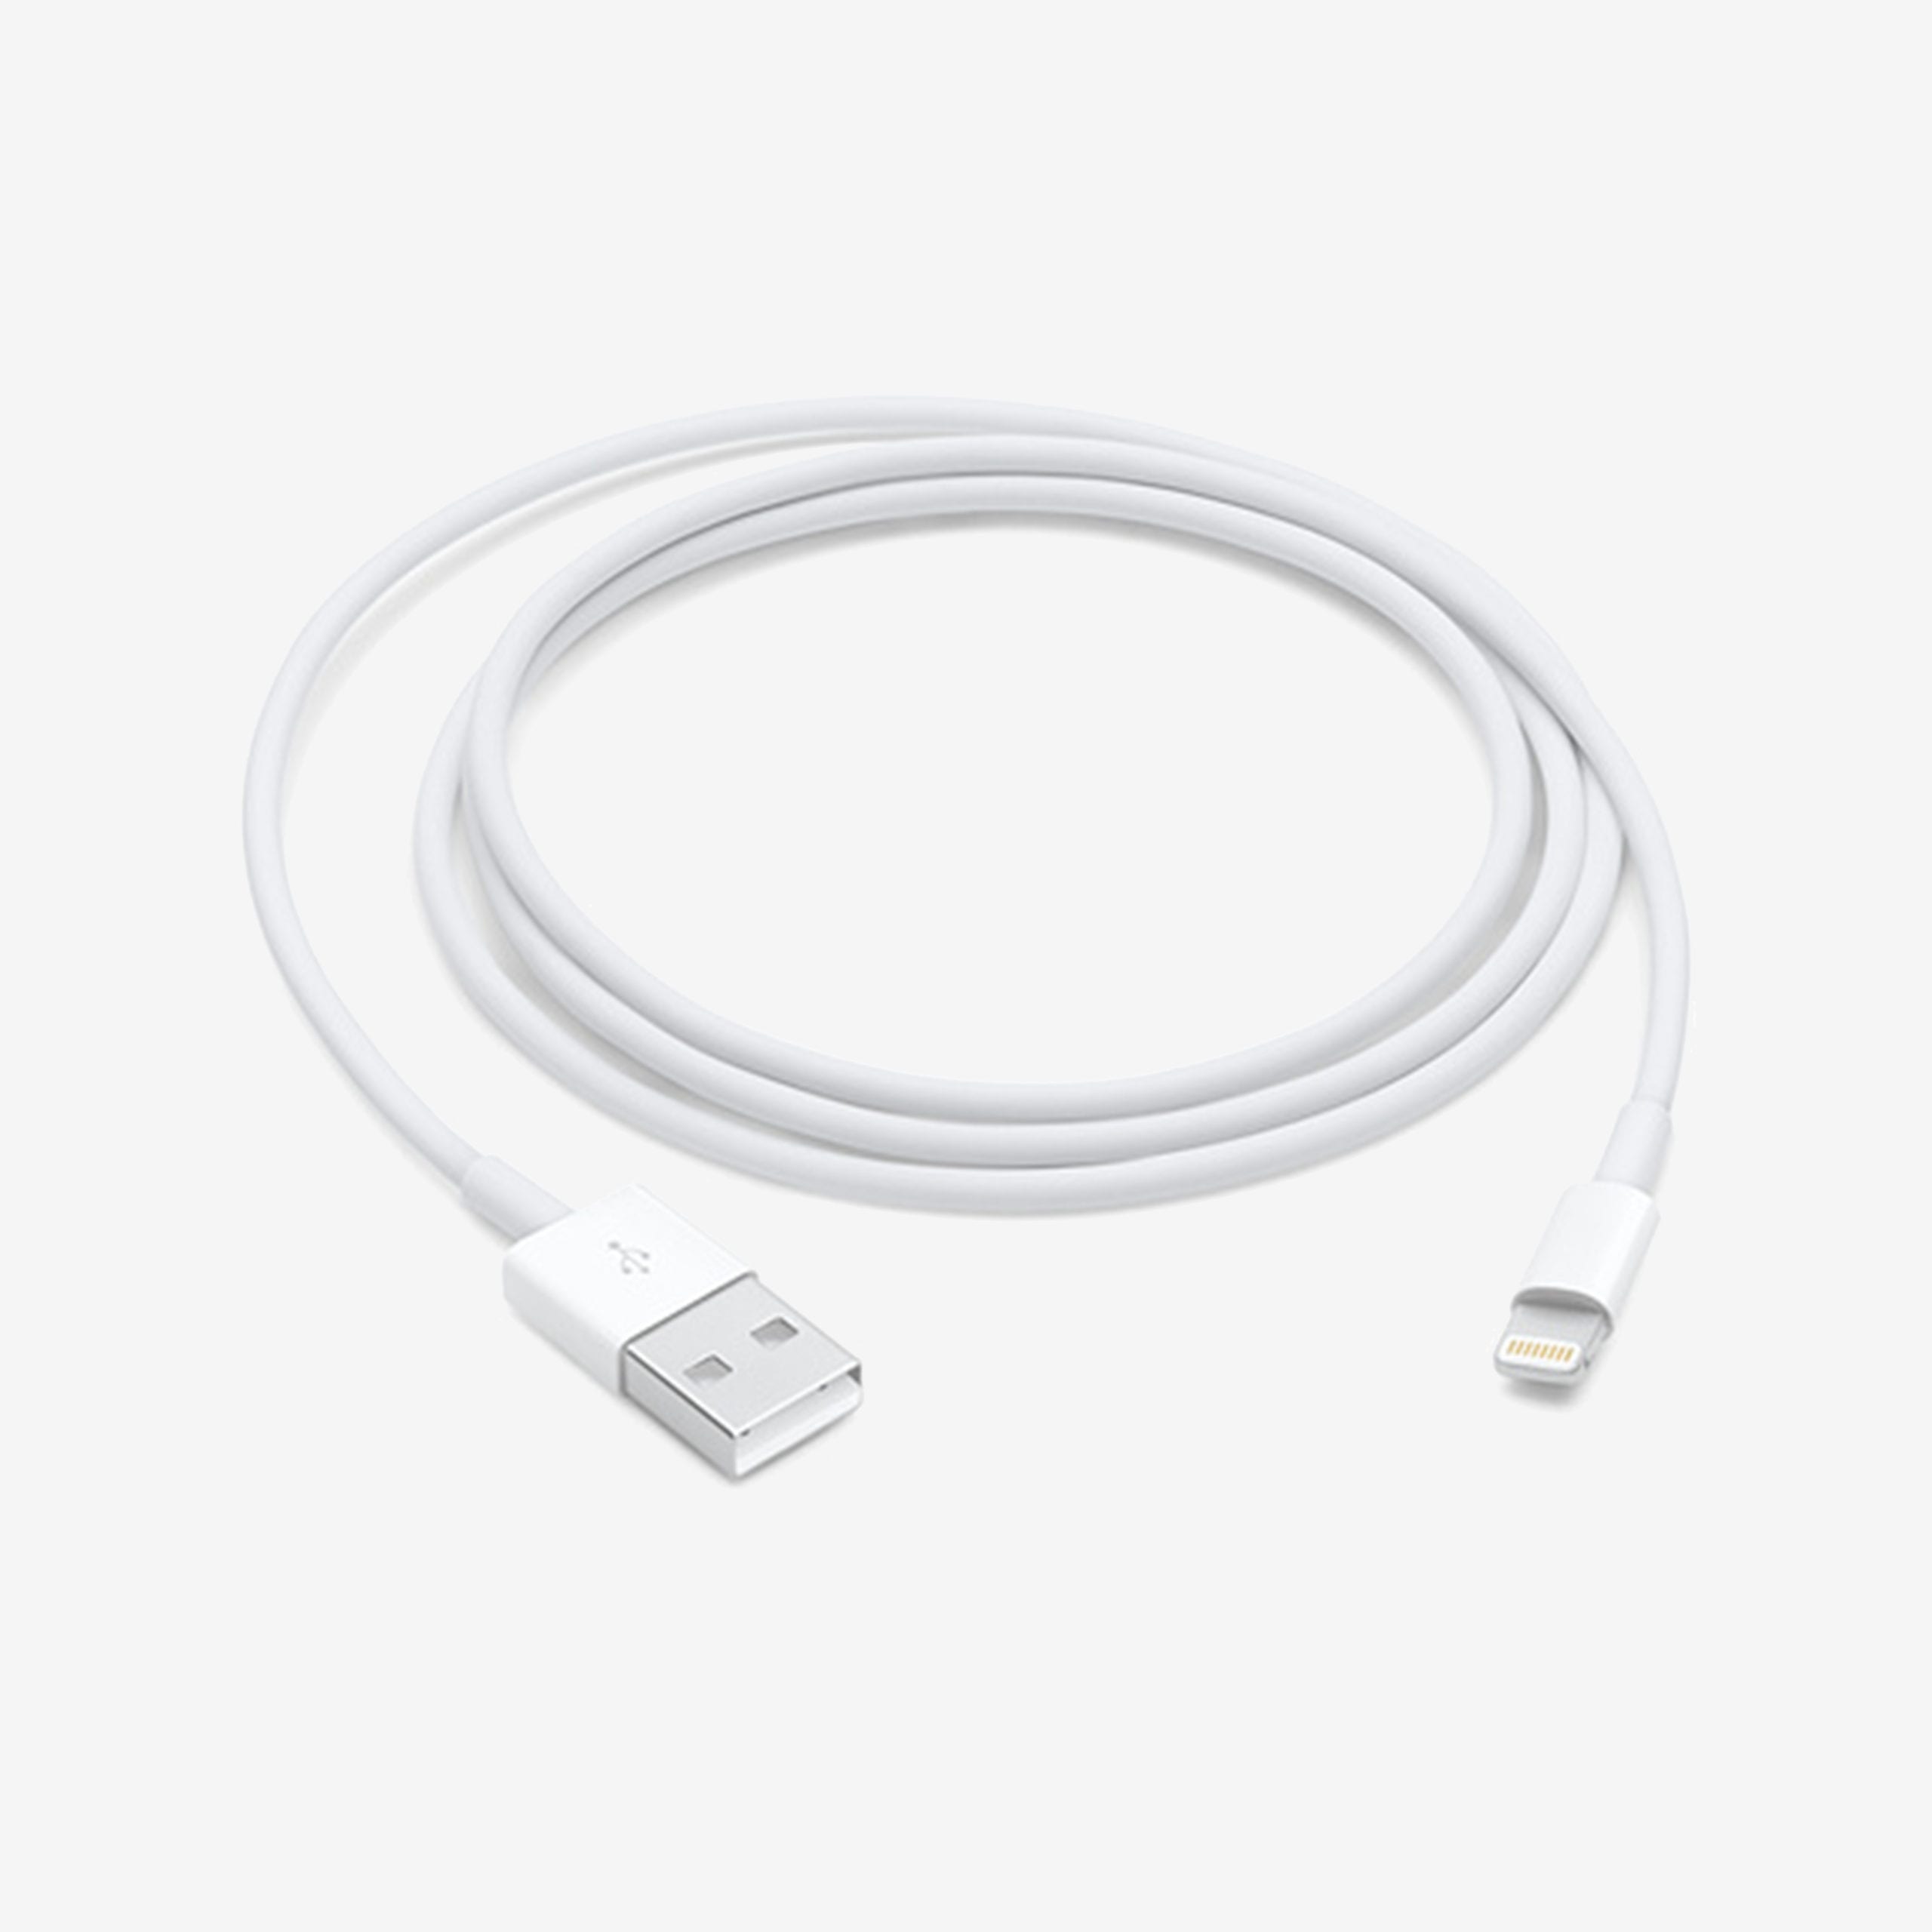 1 x Lightning Cable